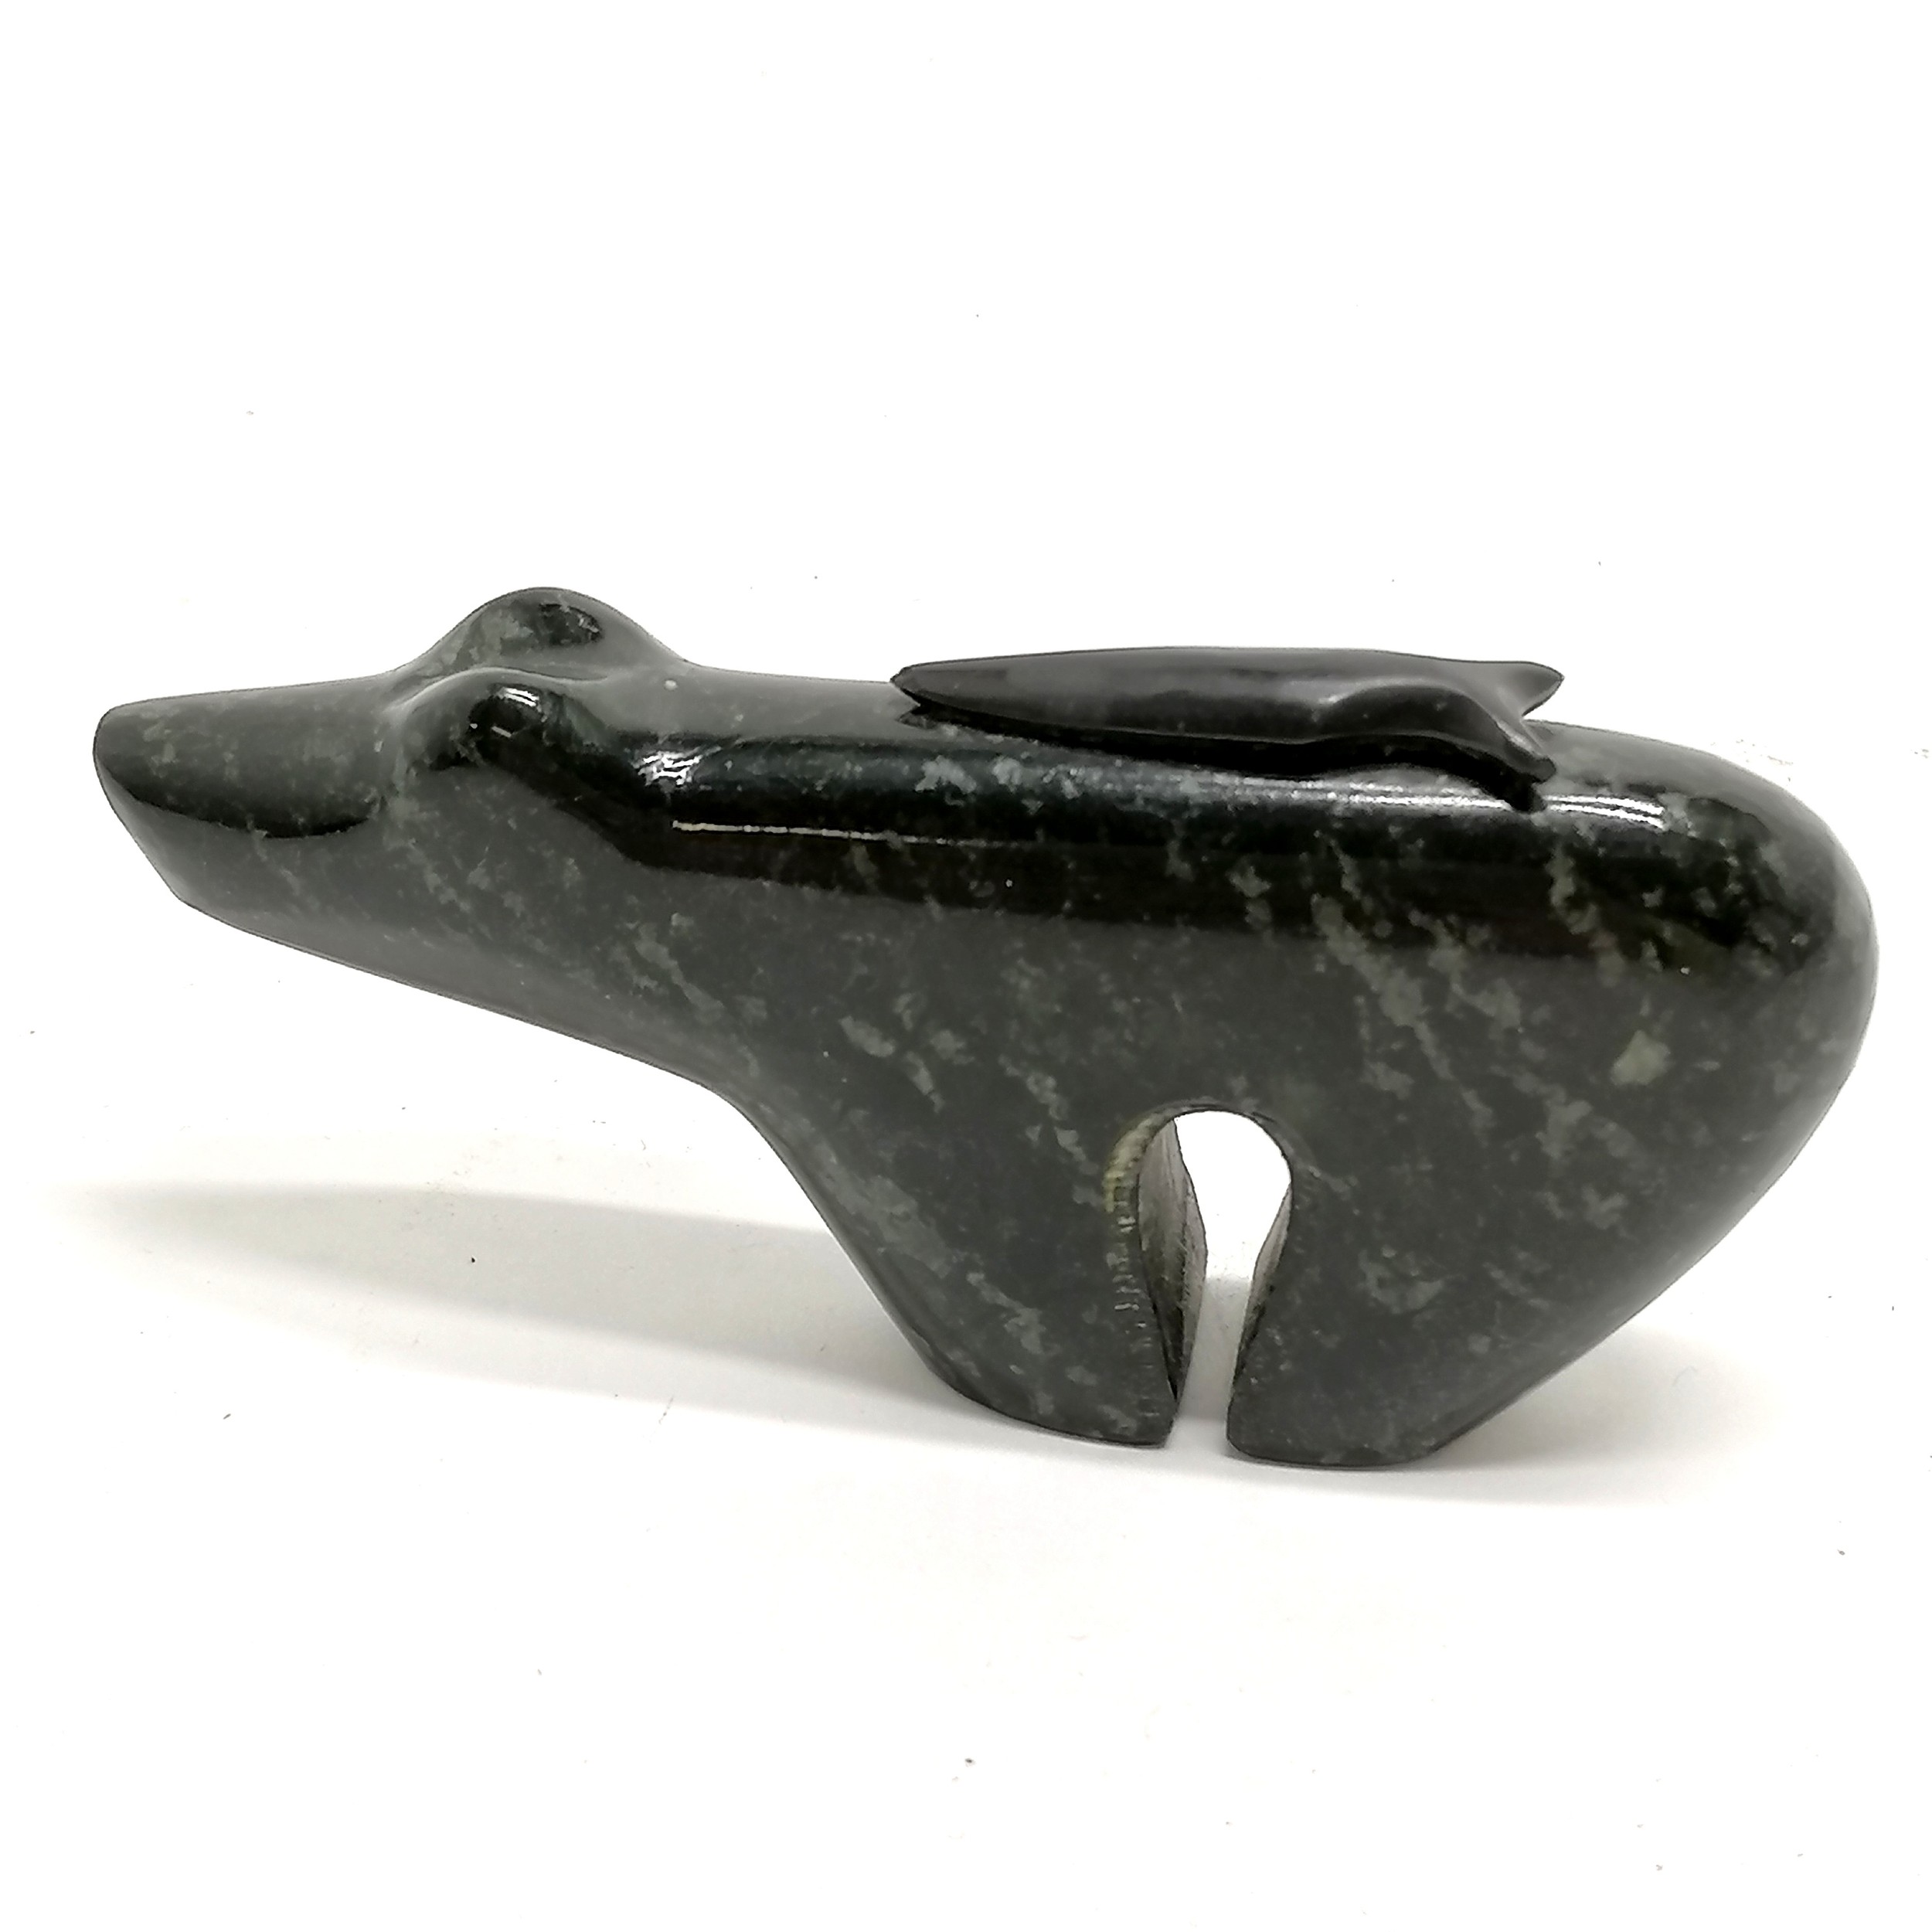 Inuit hand carved polar bear with fish on back by RH - 9.5cm long x 4.5cm high with no obvious